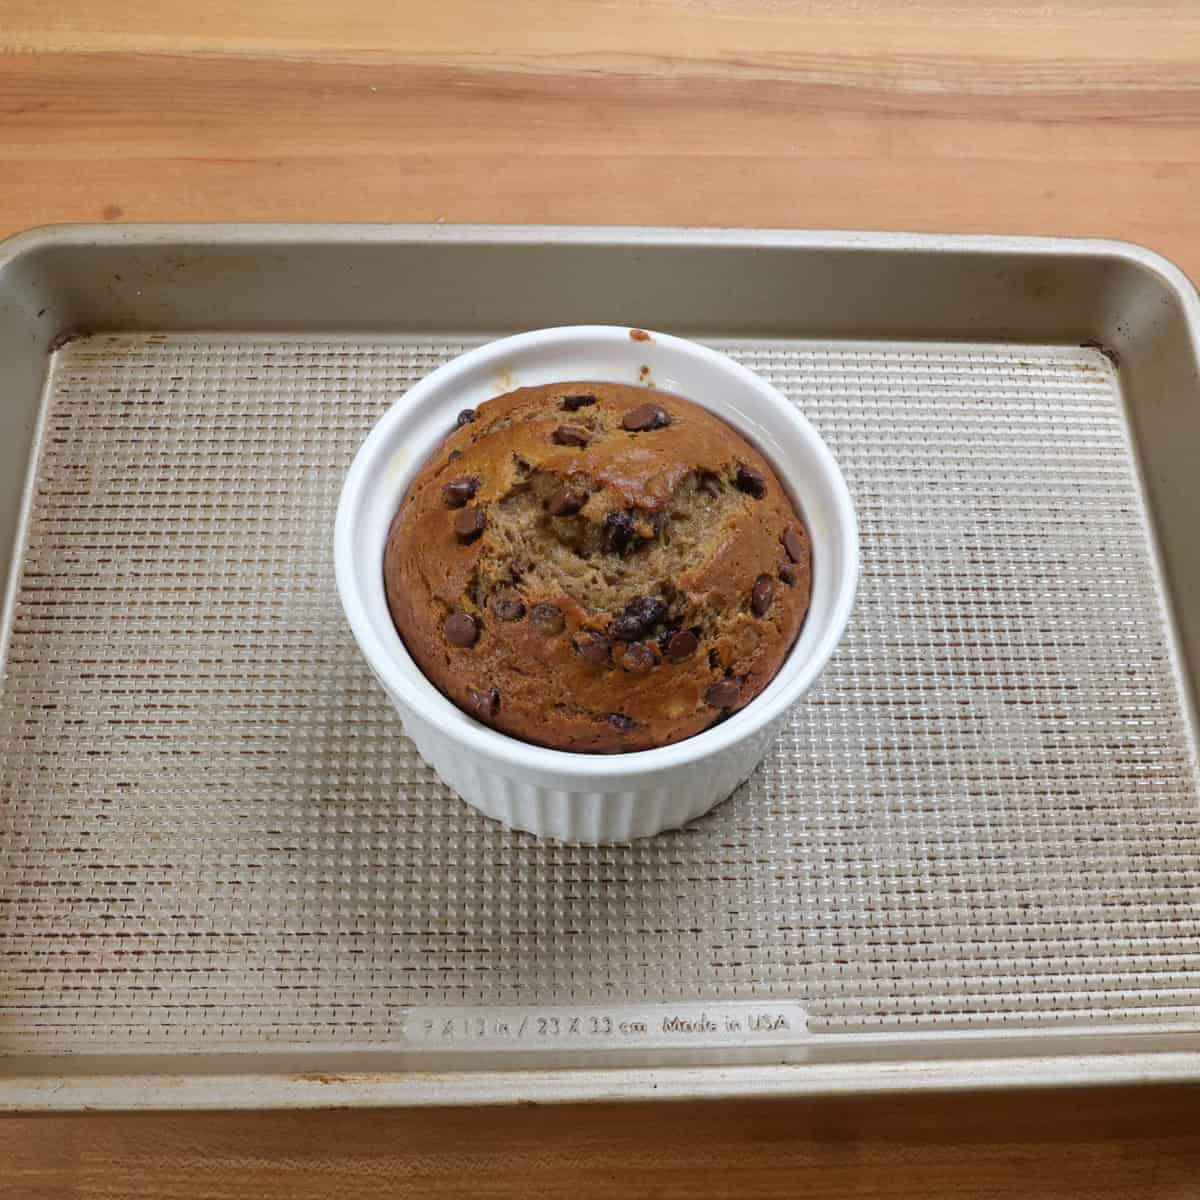 one small baked banana bread with chocolate chips on a baking sheet.